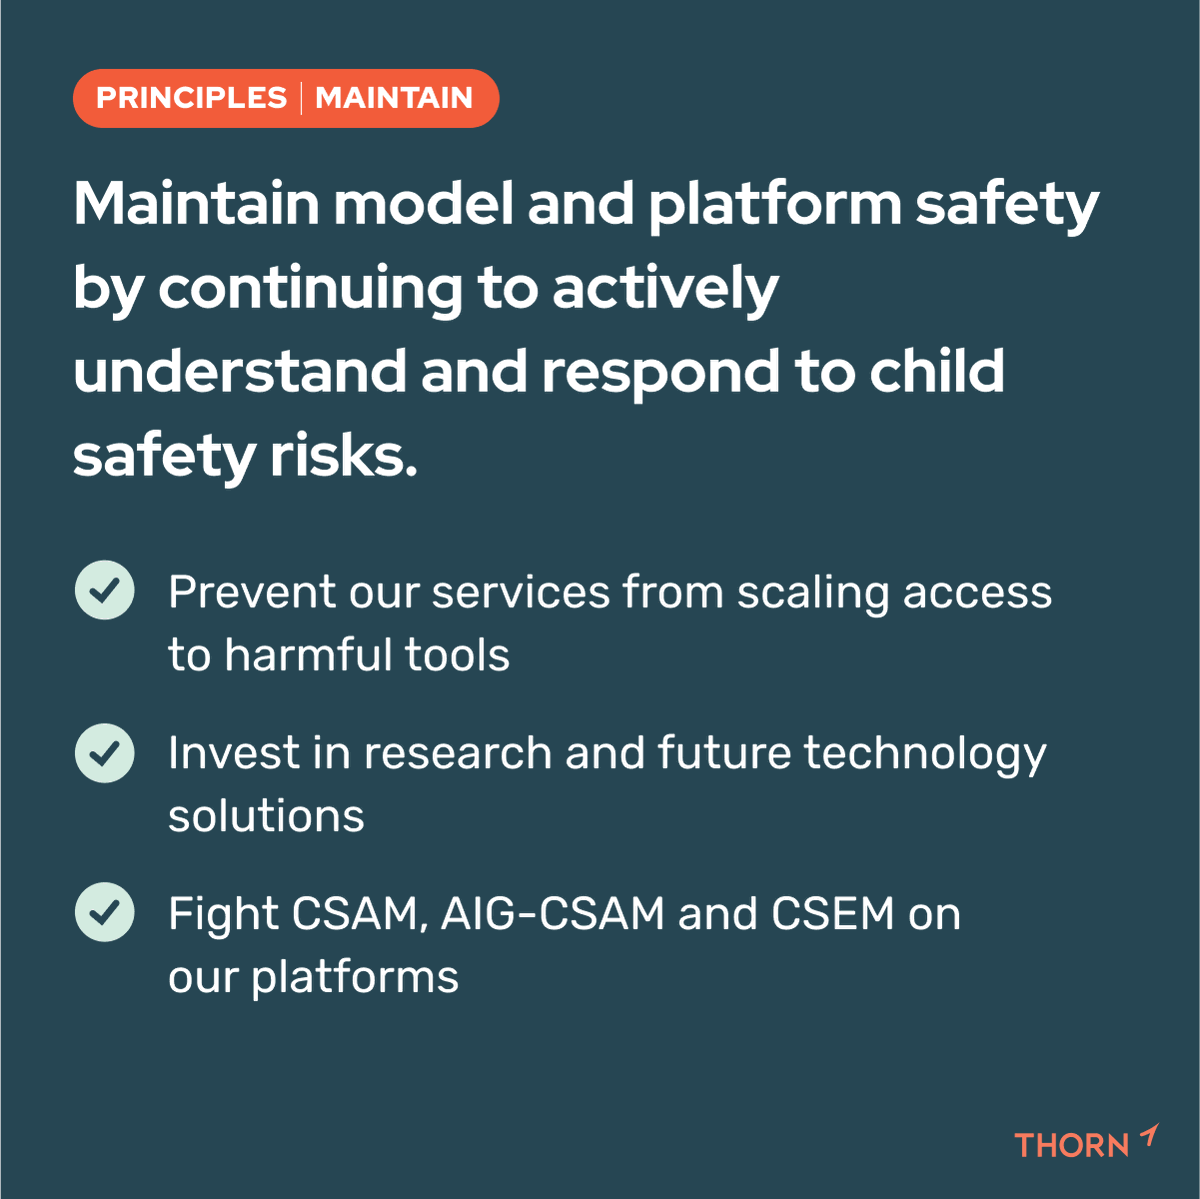 Excited to share our latest white paper with @AllTechIsHuman detailing recommended mitigations to enact #SafetyByDesign principles for gen AI. As technology evolves, it's crucial to address its risks to children. Join us in shaping a safer digital future: teamthorn.co/3Ut5qWE